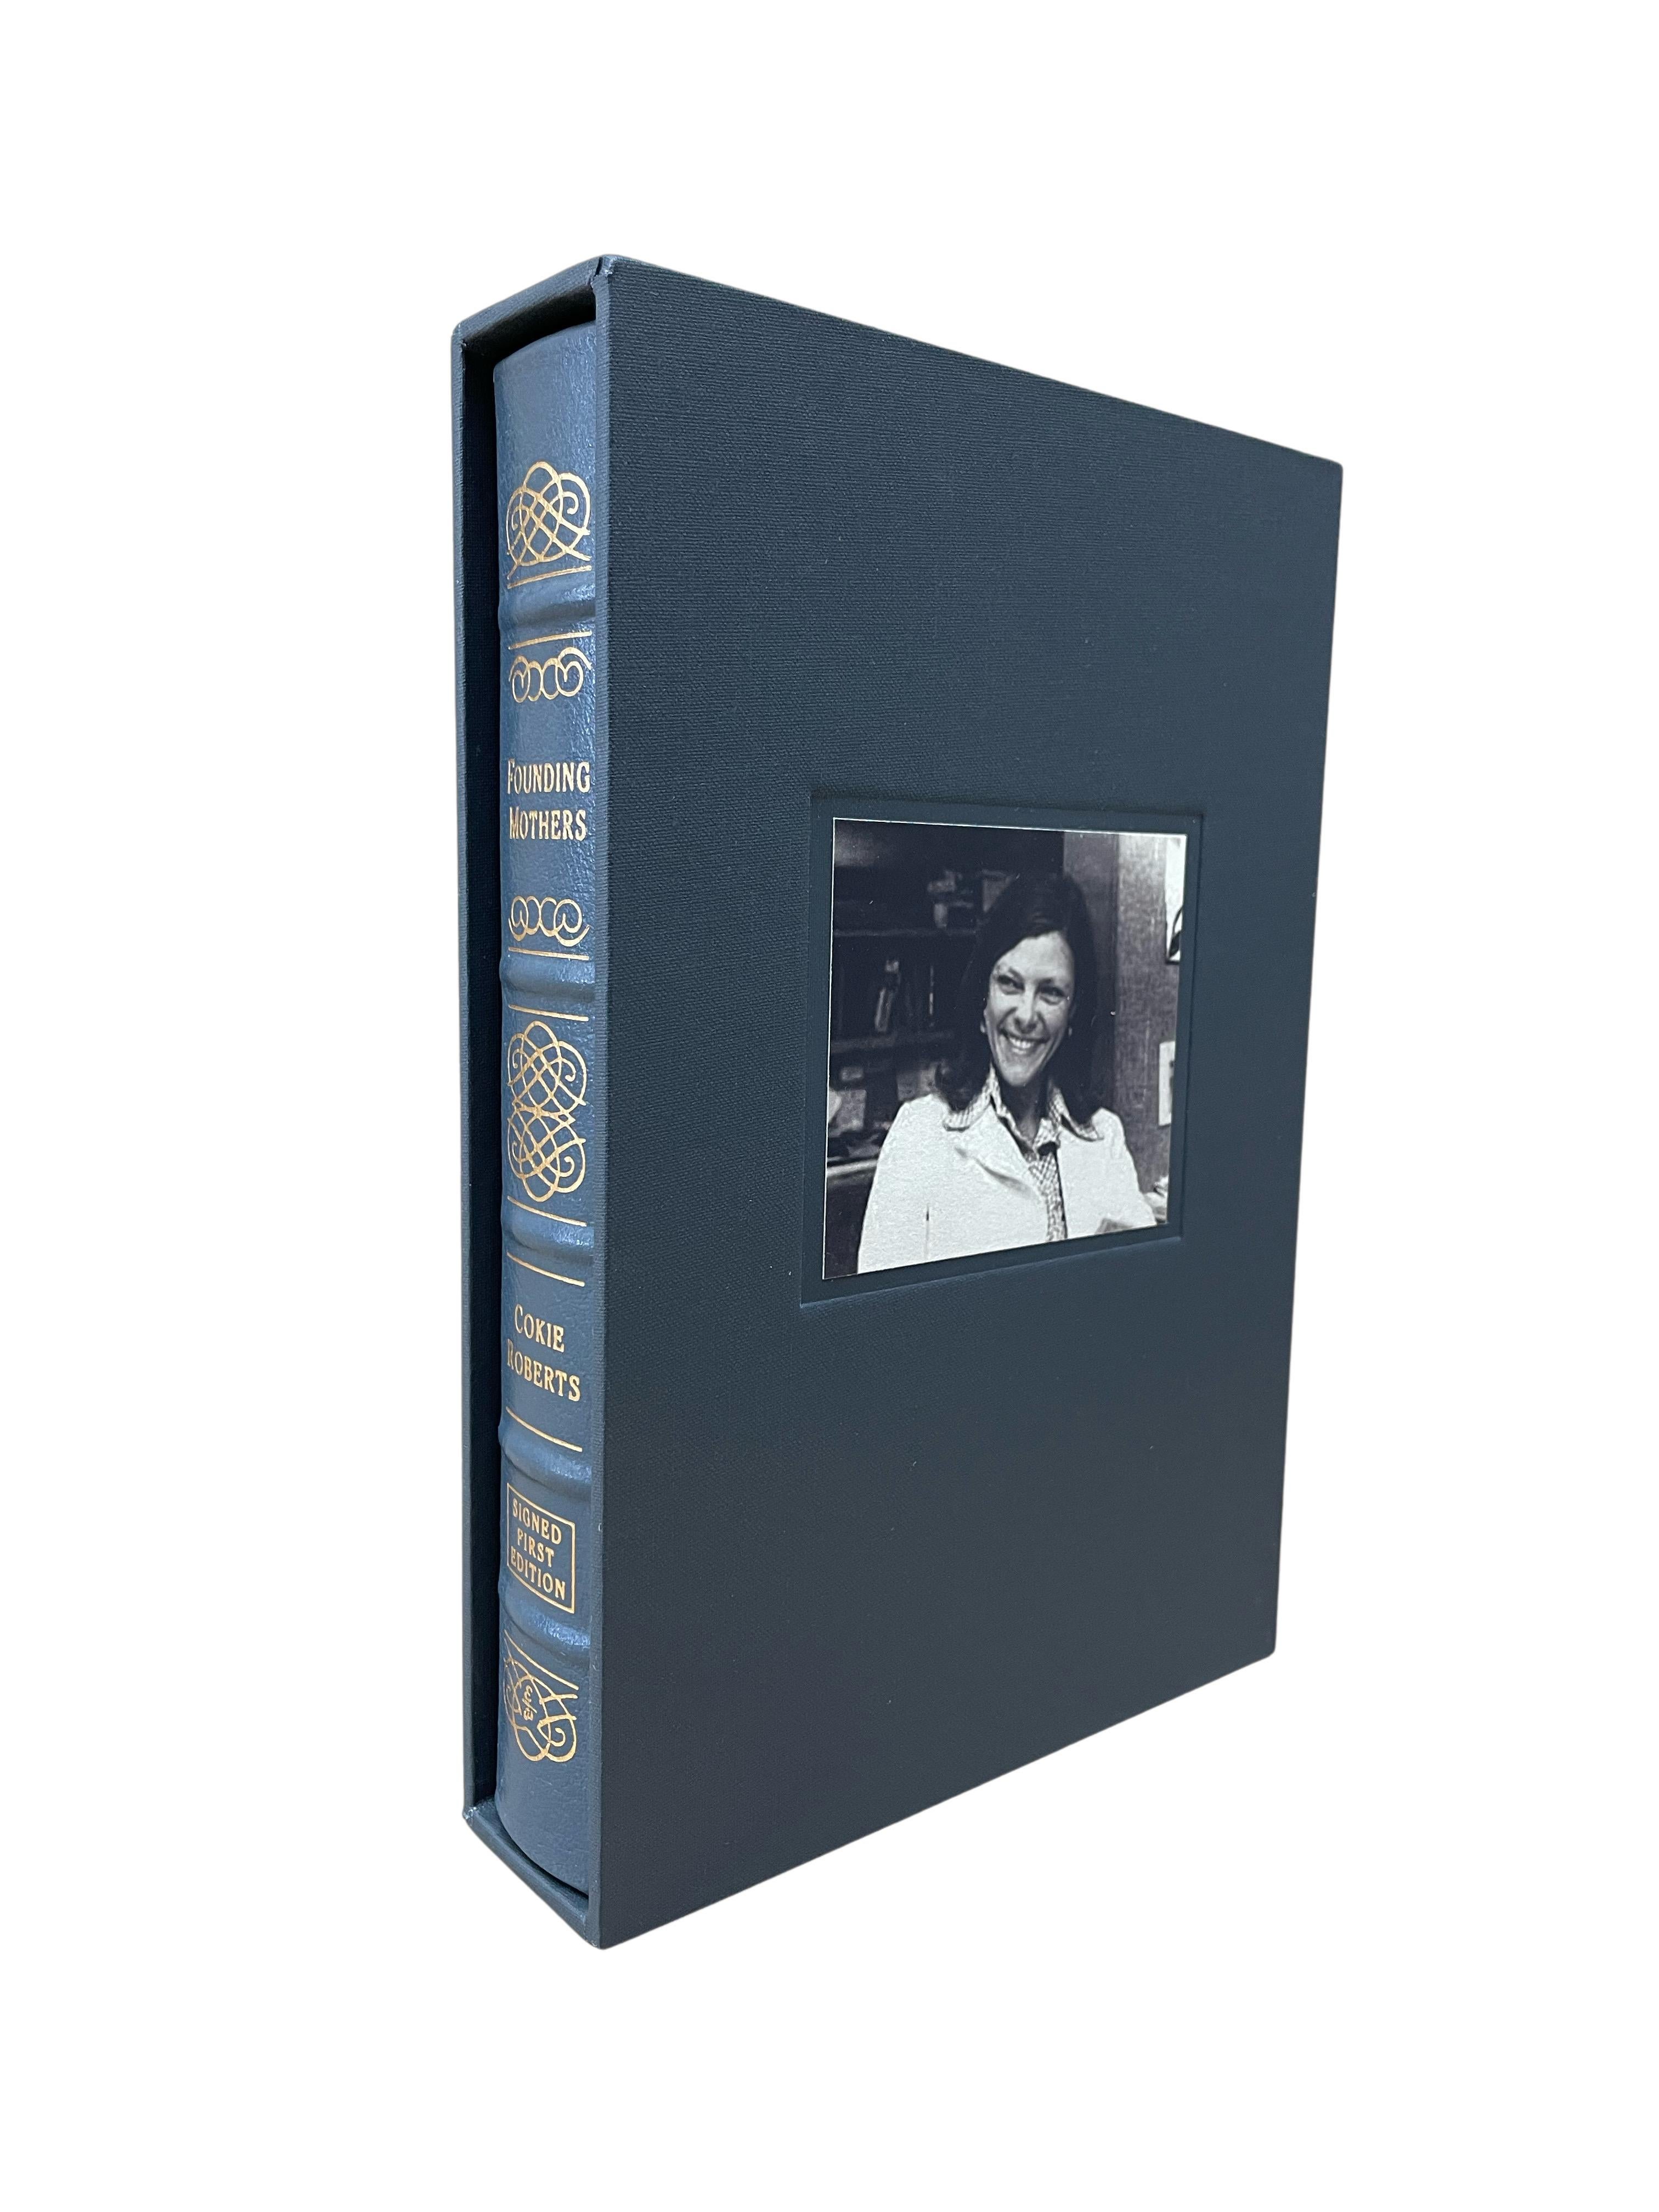 Roberts, Cokie. Founding Mothers: The Women Who Raised A Nation. Norwalk: The Easton Press, 2004. Signed, Limited Edition of 1500. Octavo. In the publisher's original full blue leather boards, lettered and decorated in gilt. New archival slipcase.